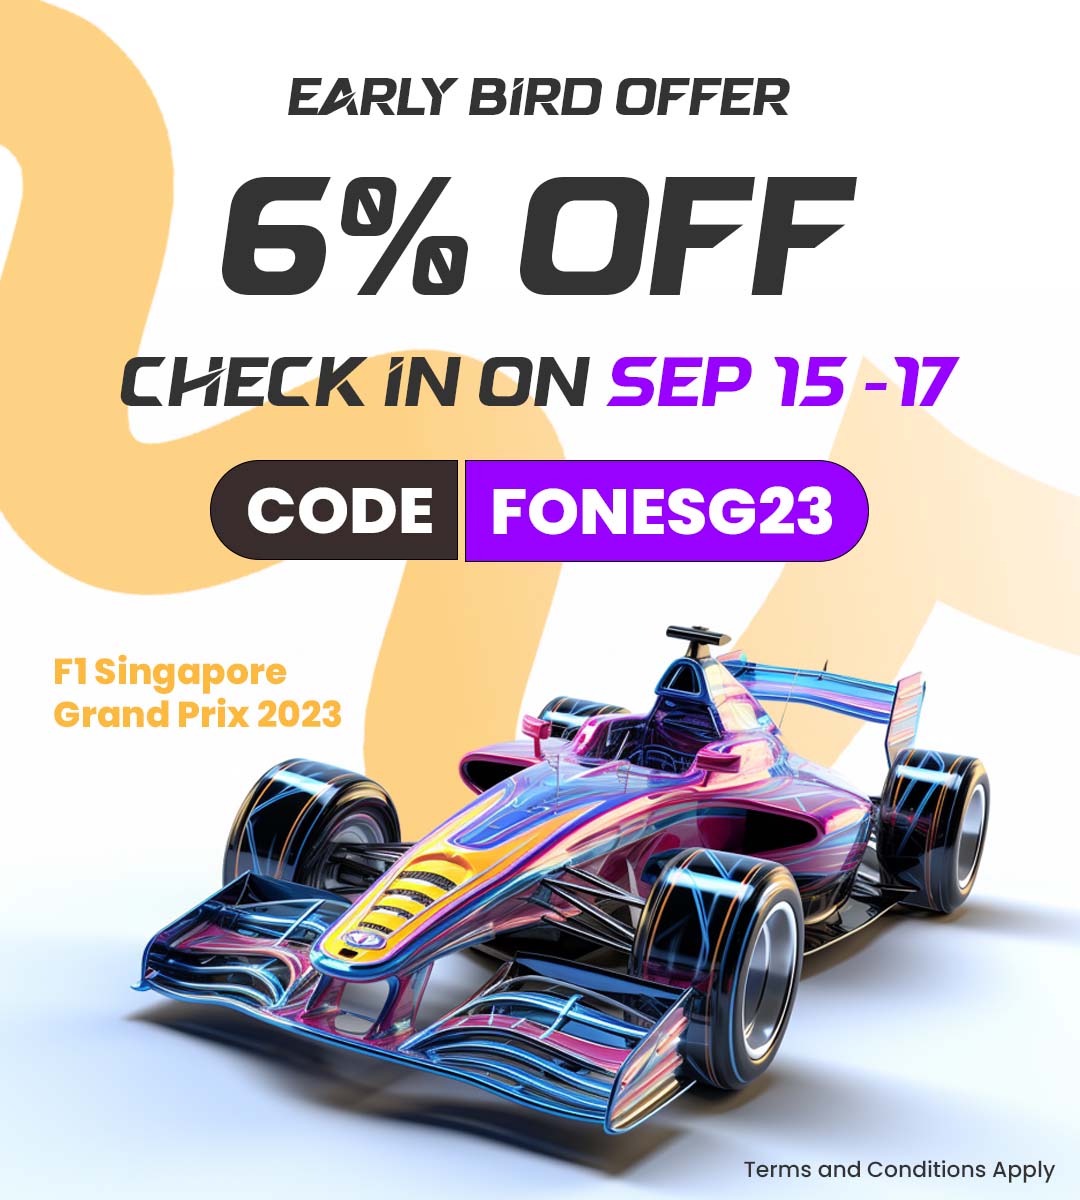 F1 Singapore 2023 Stay Offer: 6% OFF on Sep 15-17